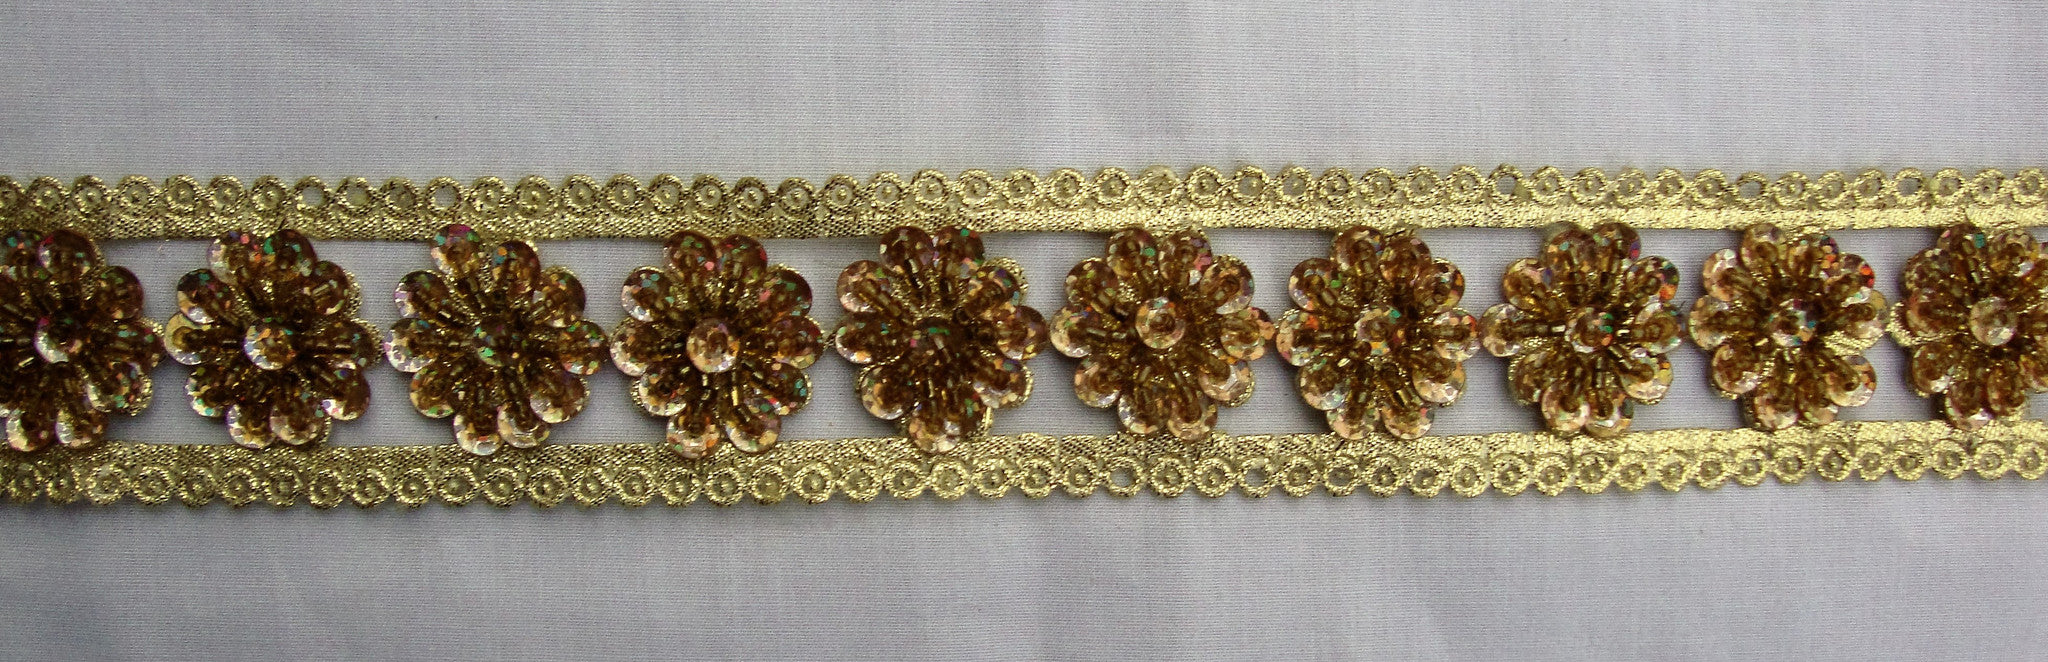 Gold Flowered Sequin Trimming (Sold as a 1.5 yard piece)